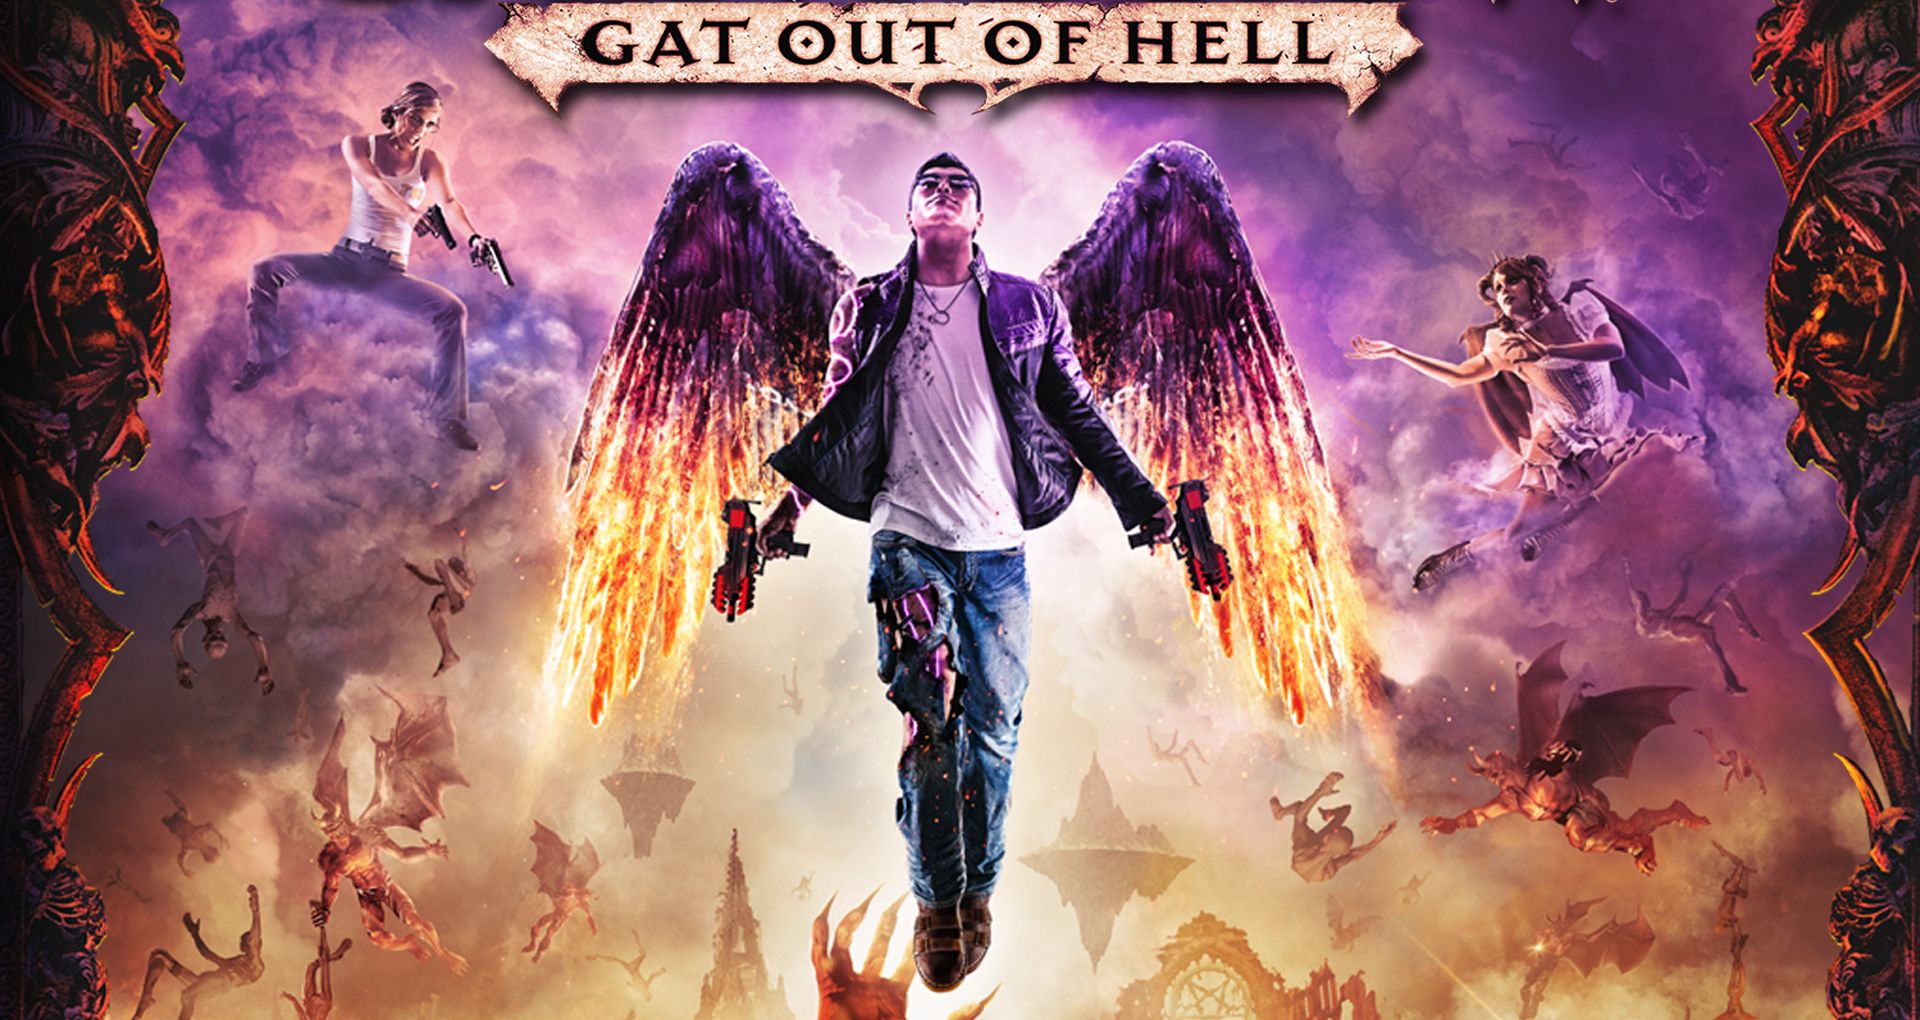 Steam saint row gat out of hell фото 38